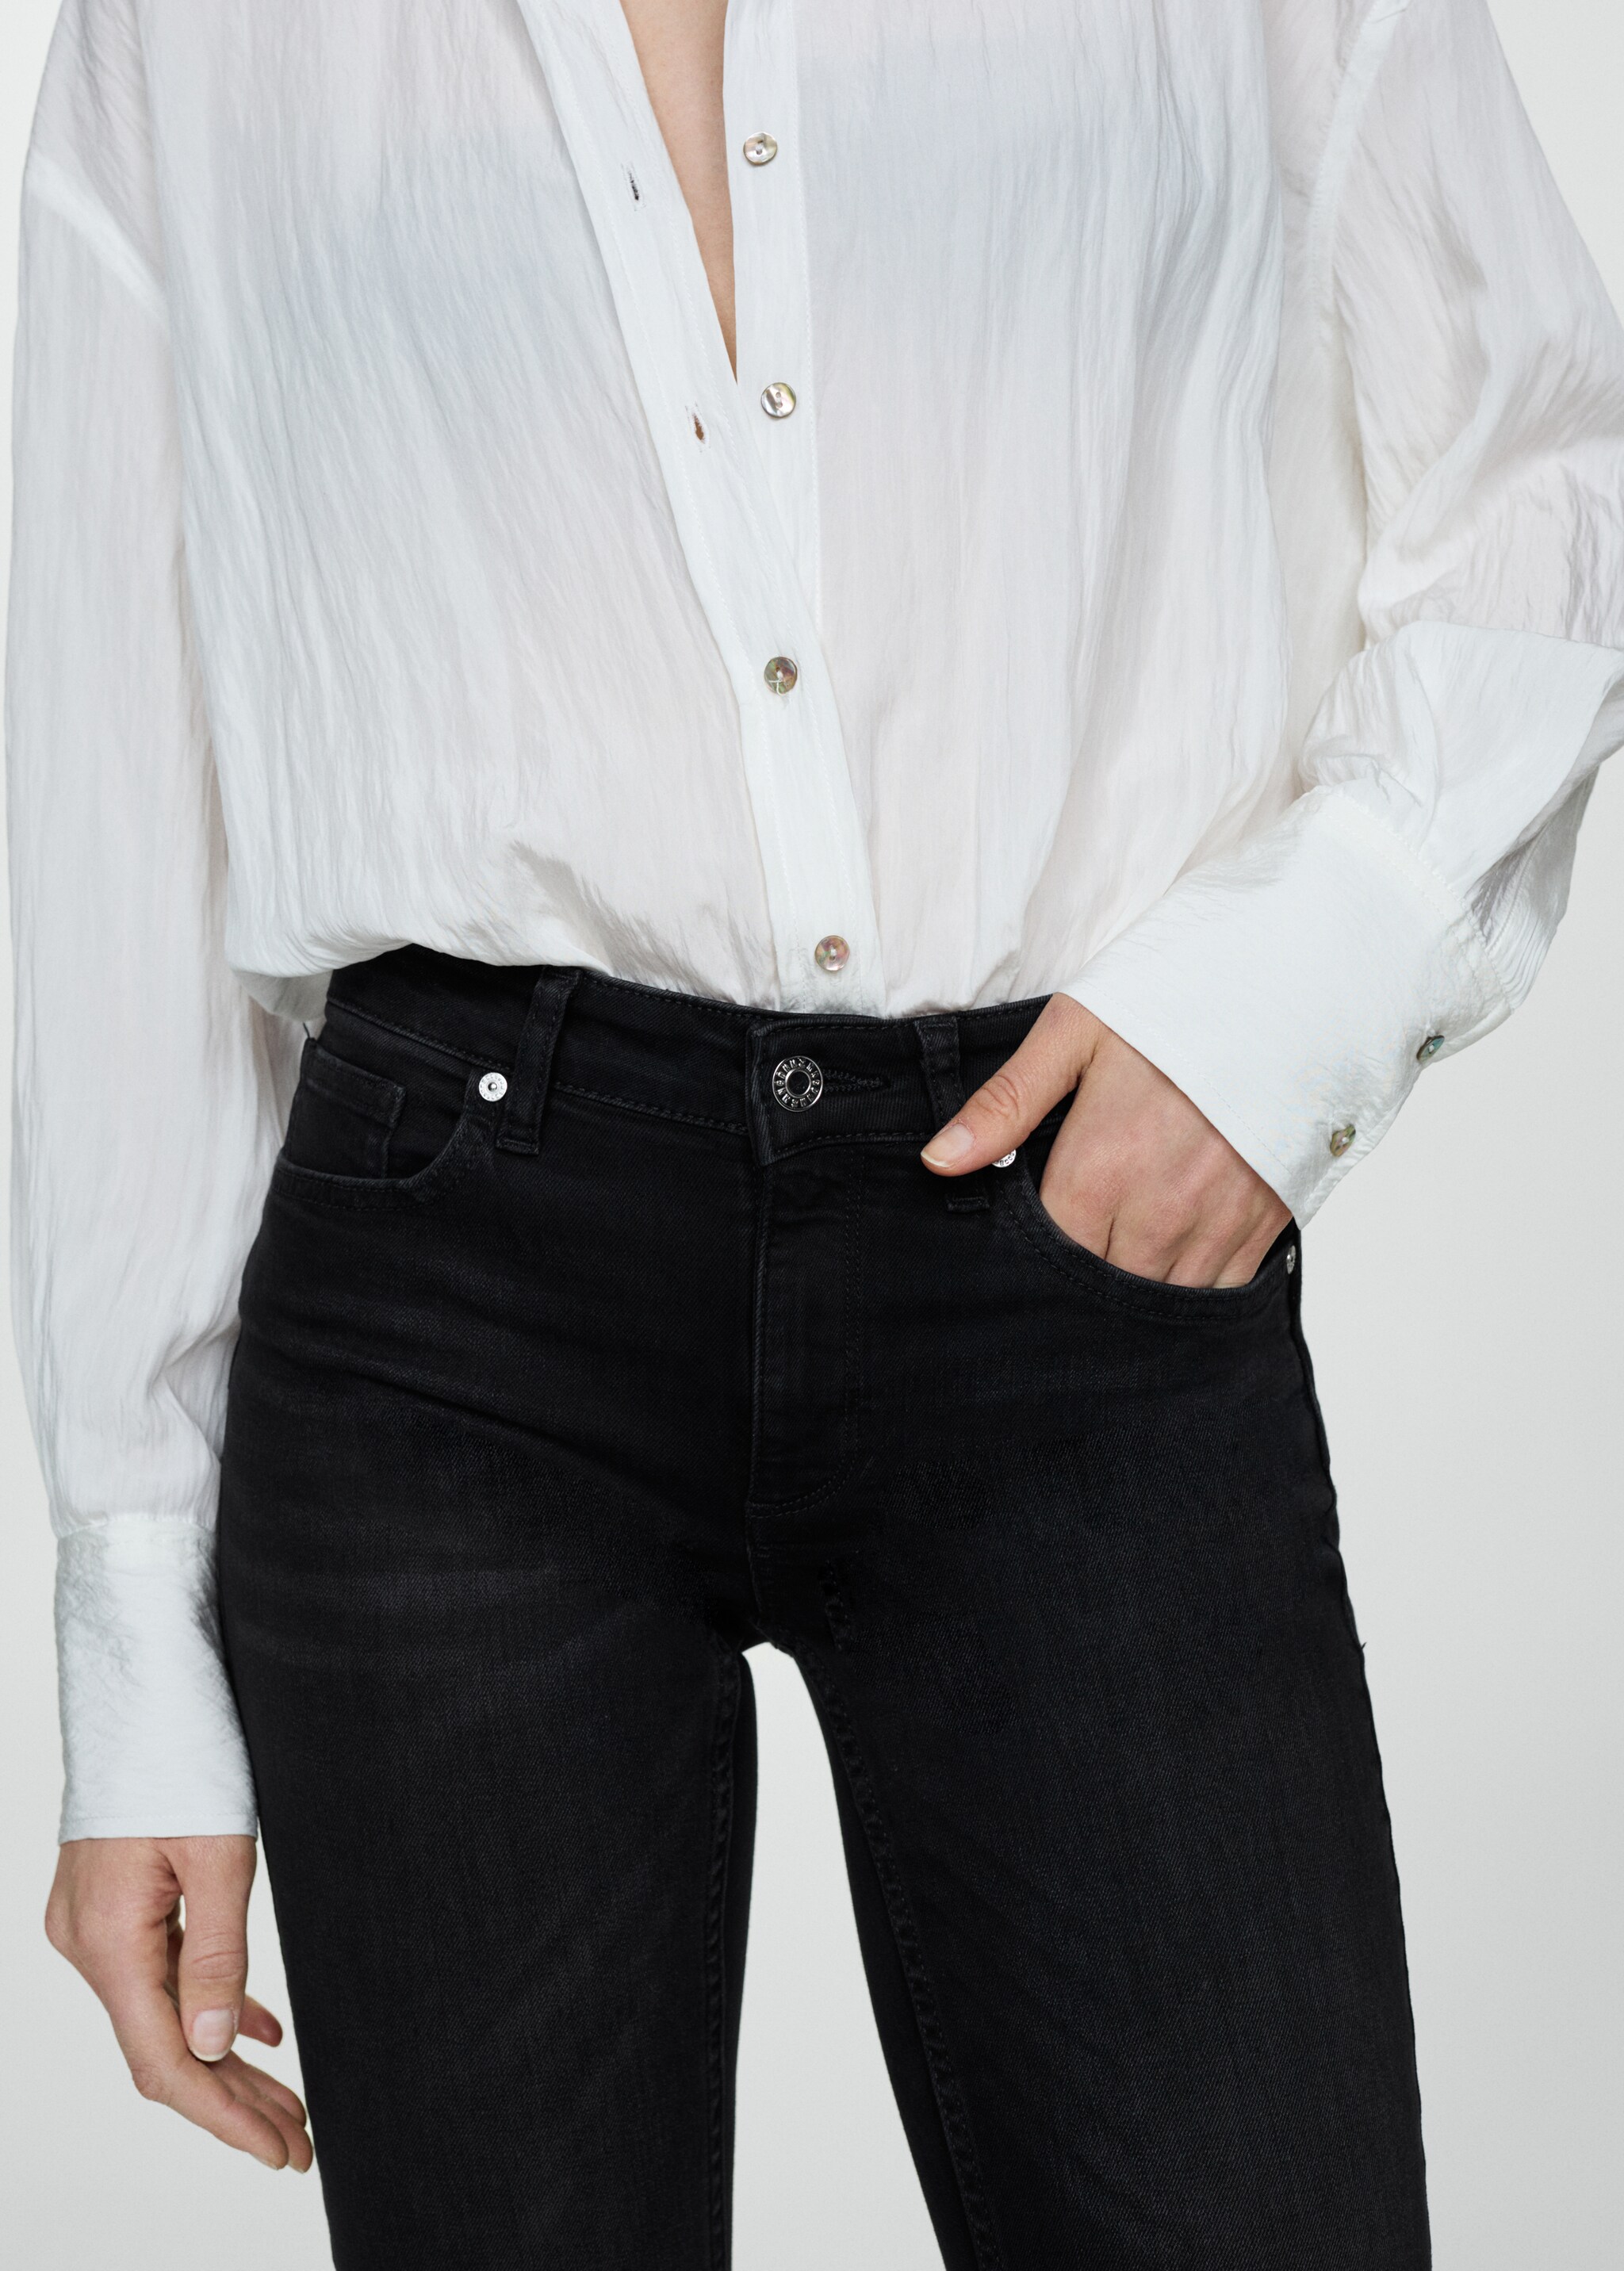 Skinny push-up jeans - Details of the article 6